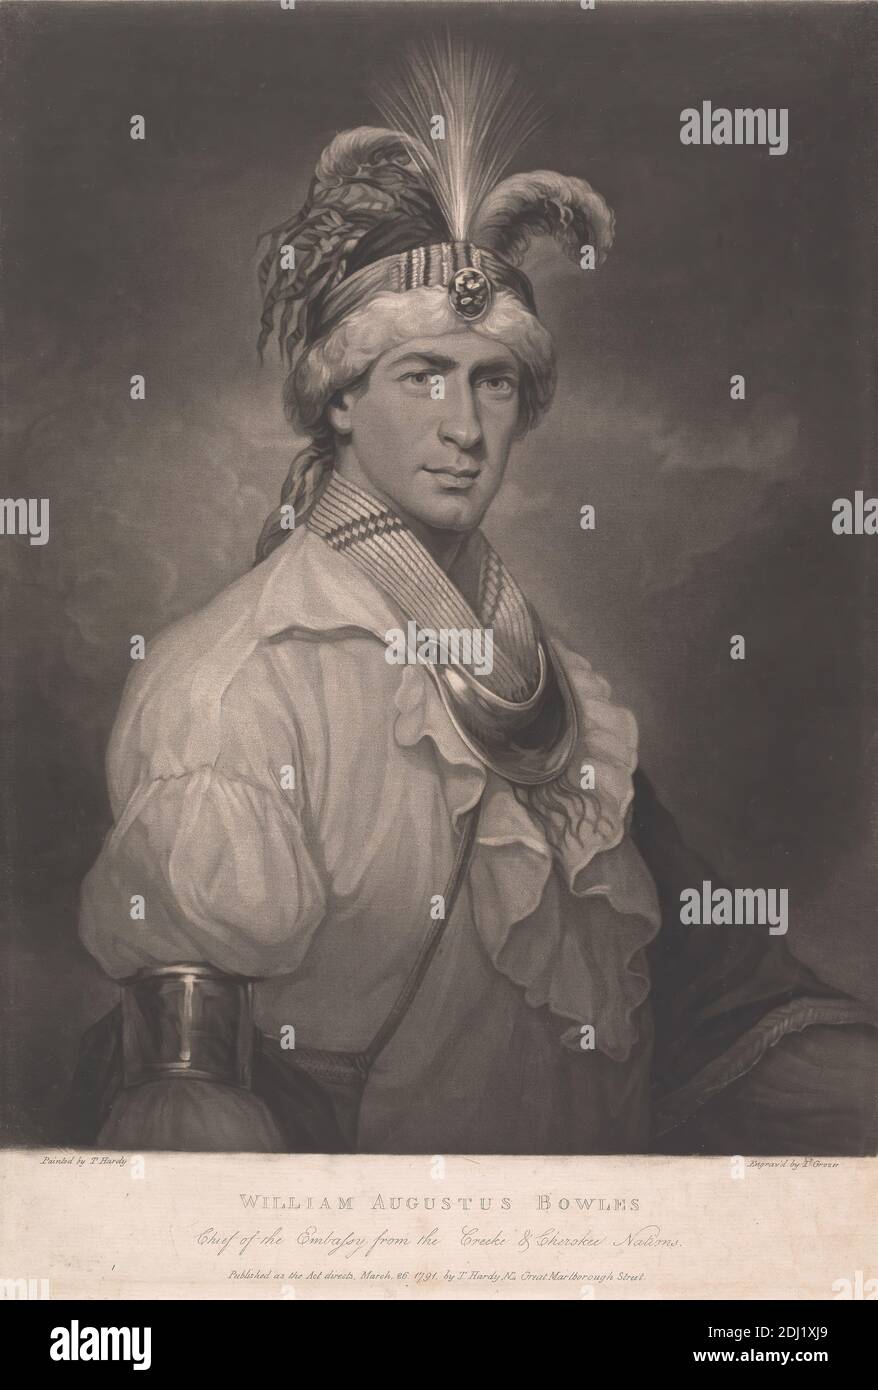 William Augustus Bowles, Chief of the Embassy from the Creeke & Cherokee Nations, Joseph Grozer, ca. 1755–1798, British, after Thomas Hardy, 1757–1805, British, Published by Thomas Hardy, 1757–1805, British, 1791, Mezzotint on moderately thick, moderately textured, cream laid paper, Sheet: 16 3/4 x 11 7/16 inches (42.5 x 29 cm) and Image: 14 3/4 x 11 5/16 inches (37.5 x 28.8 cm), aigrette, armband, band (collar), cloak, feathers, hat, jewel, man, Native American, portrait, ruffles, satchel, wampum Stock Photo